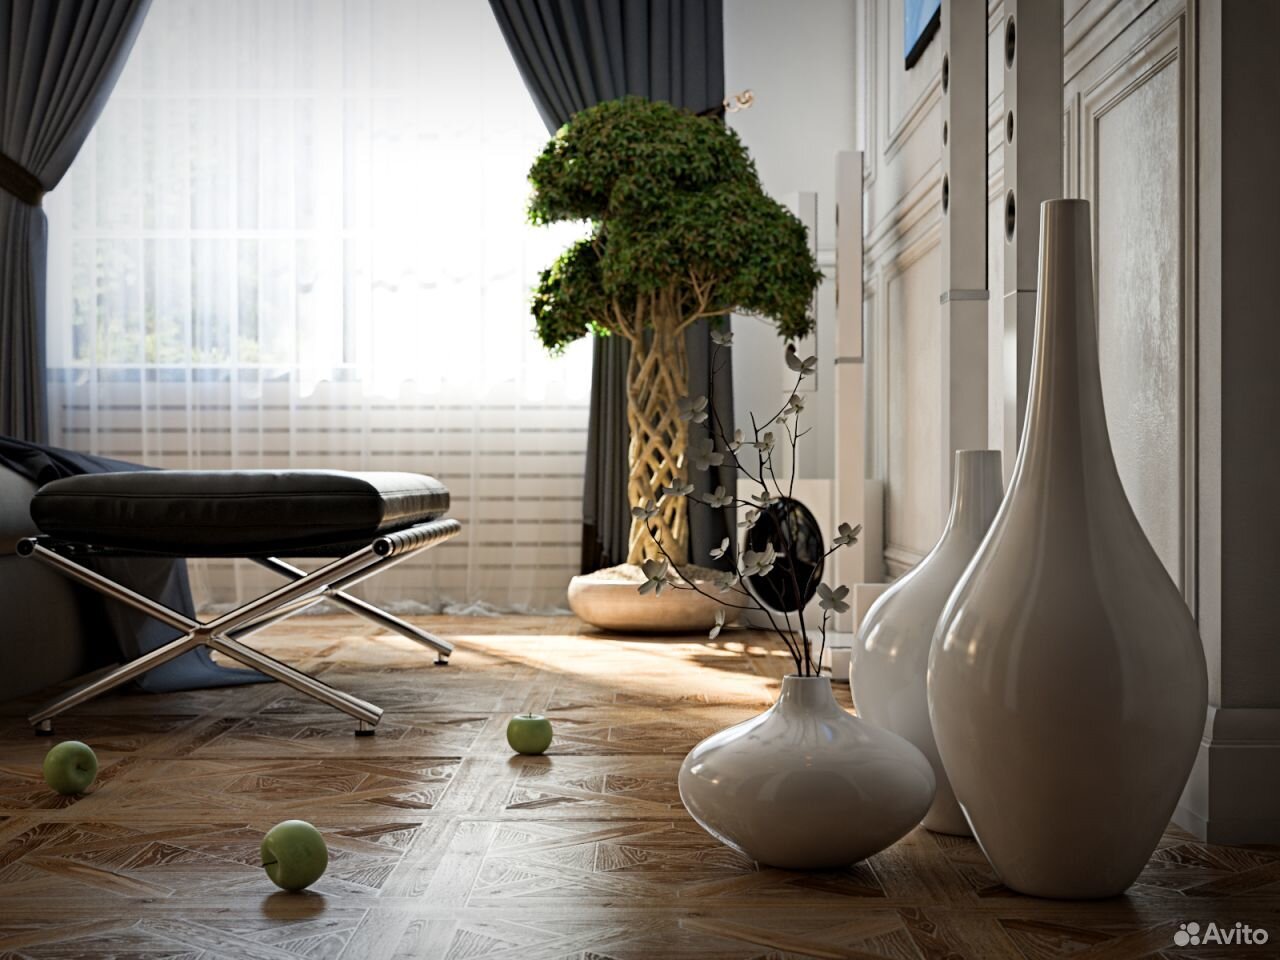 3ds Max Vray